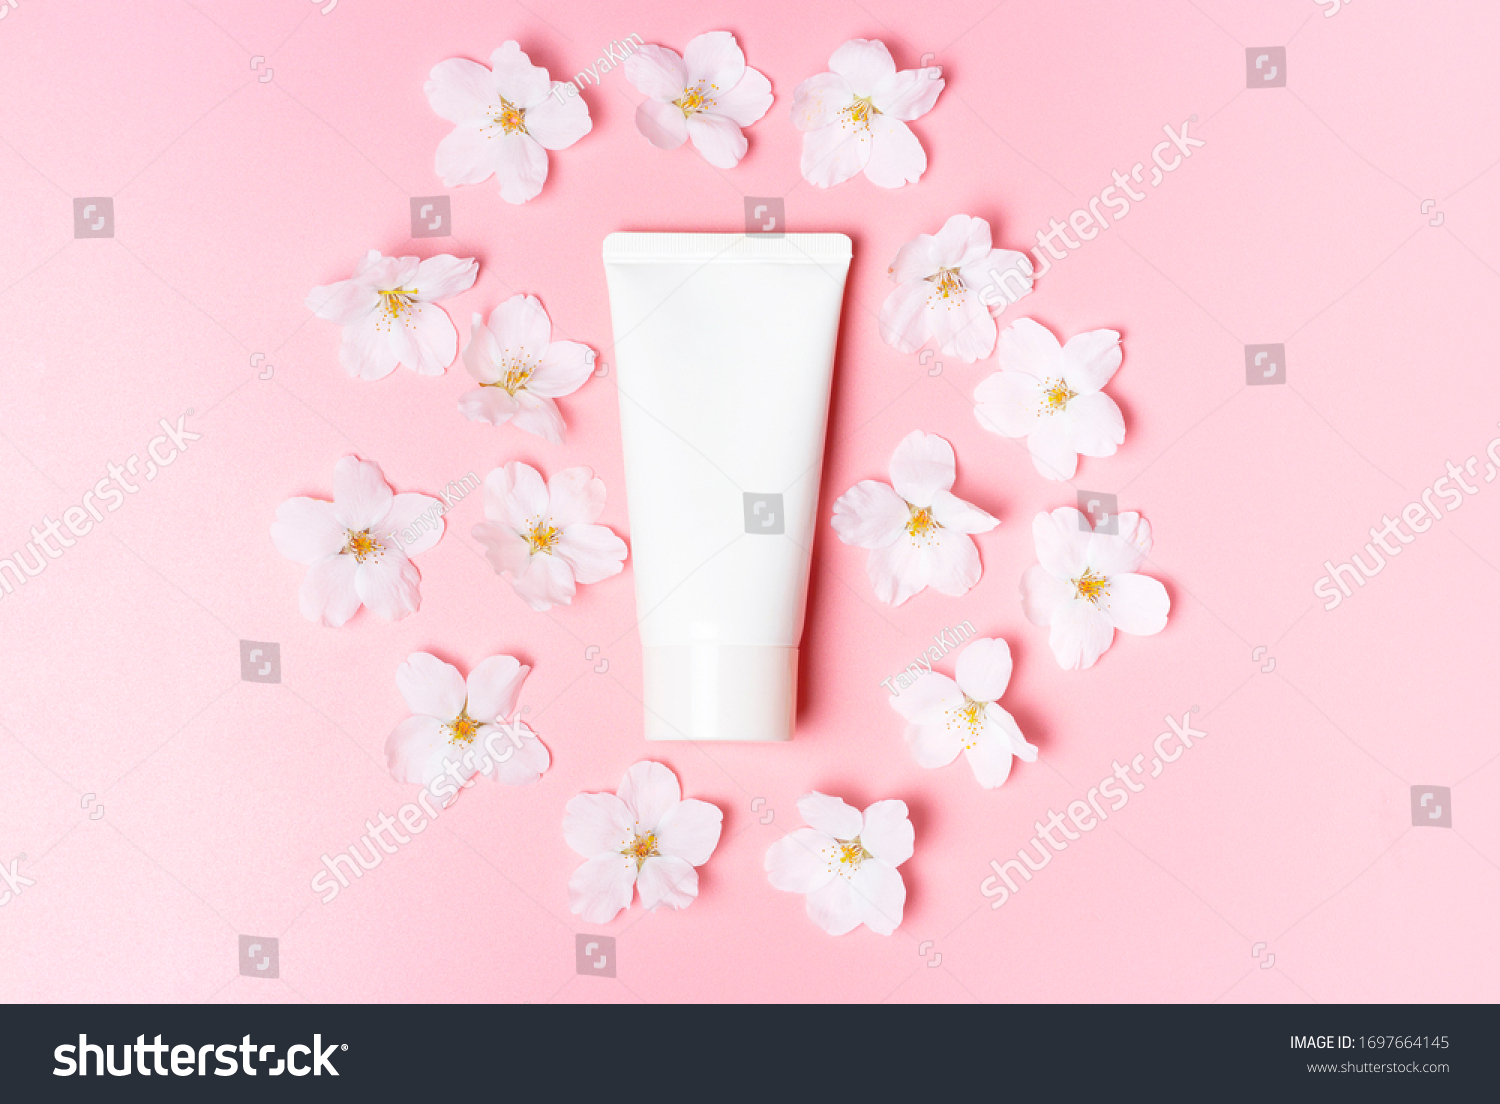 White tube of cream and flowers on a pink background. #1697664145